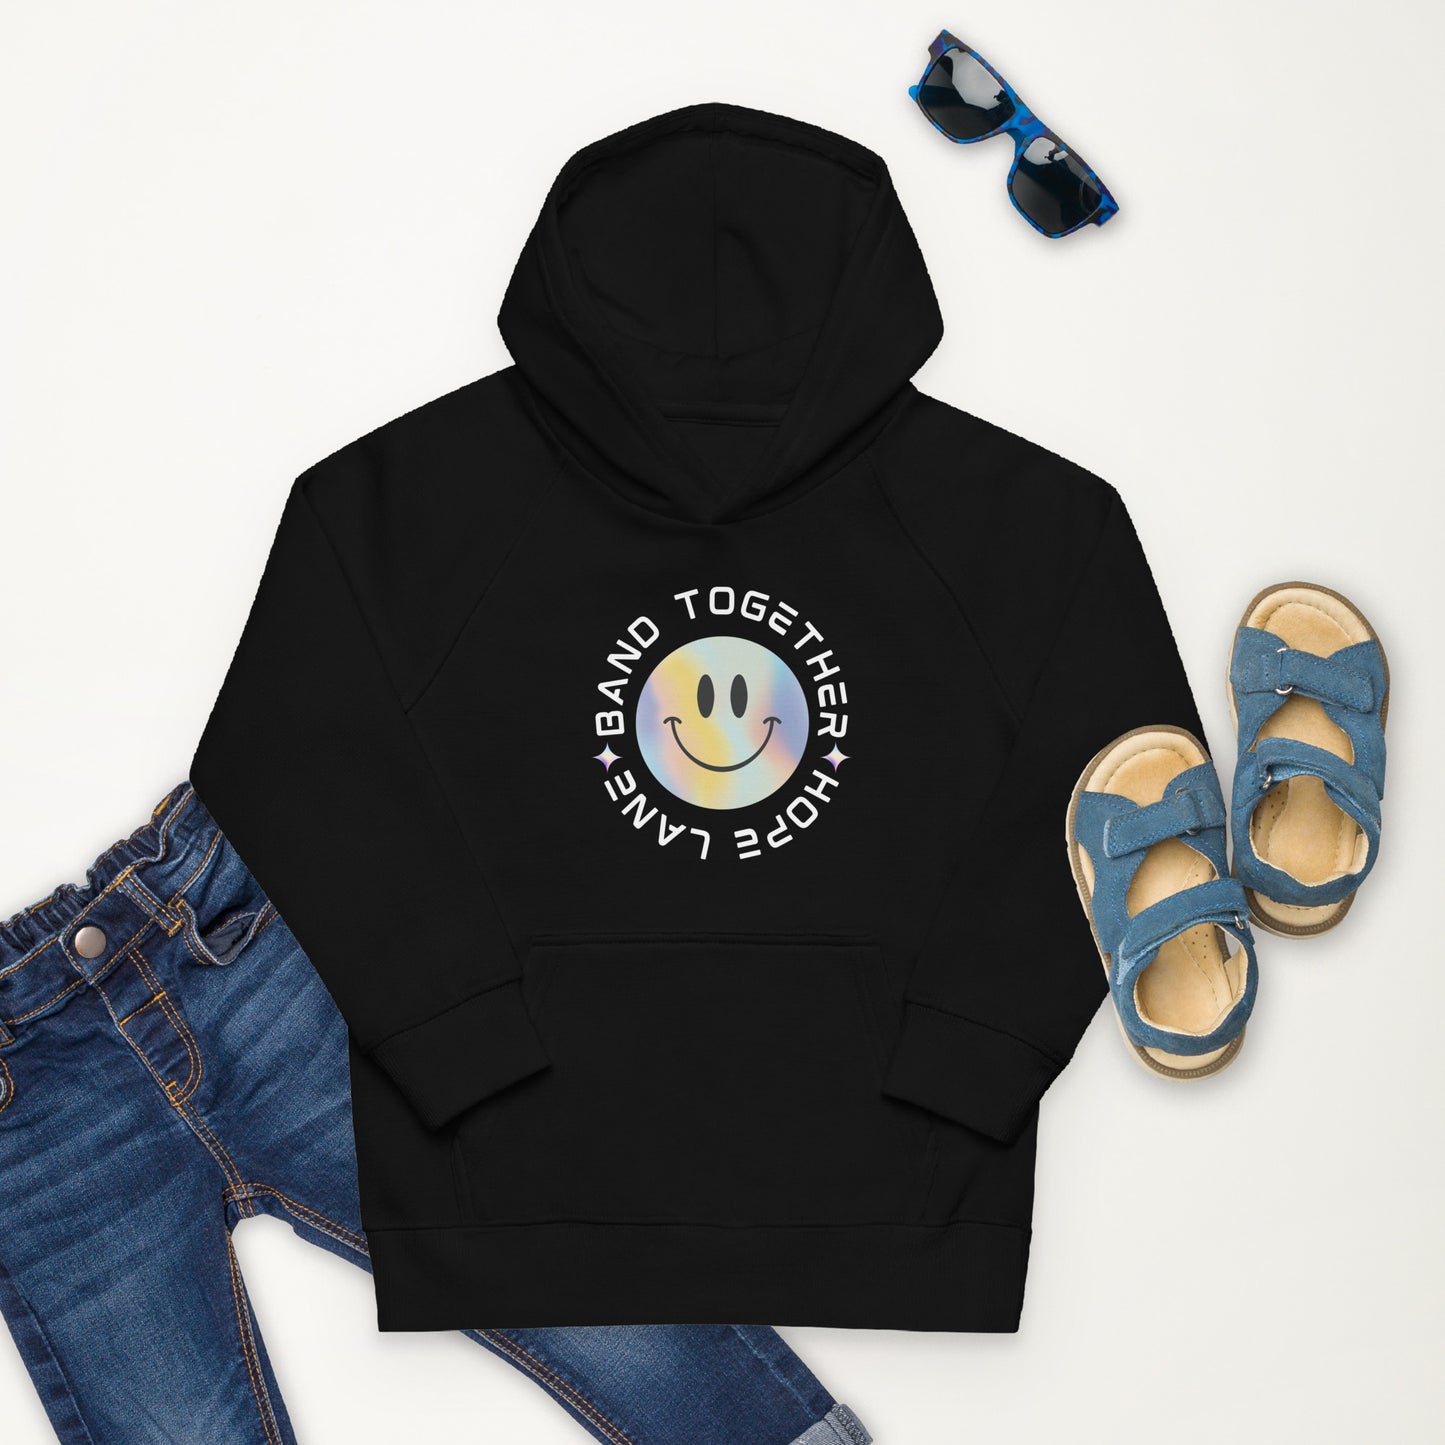 'Band Together' Kids eco hoodie (official Hope Lane merch)